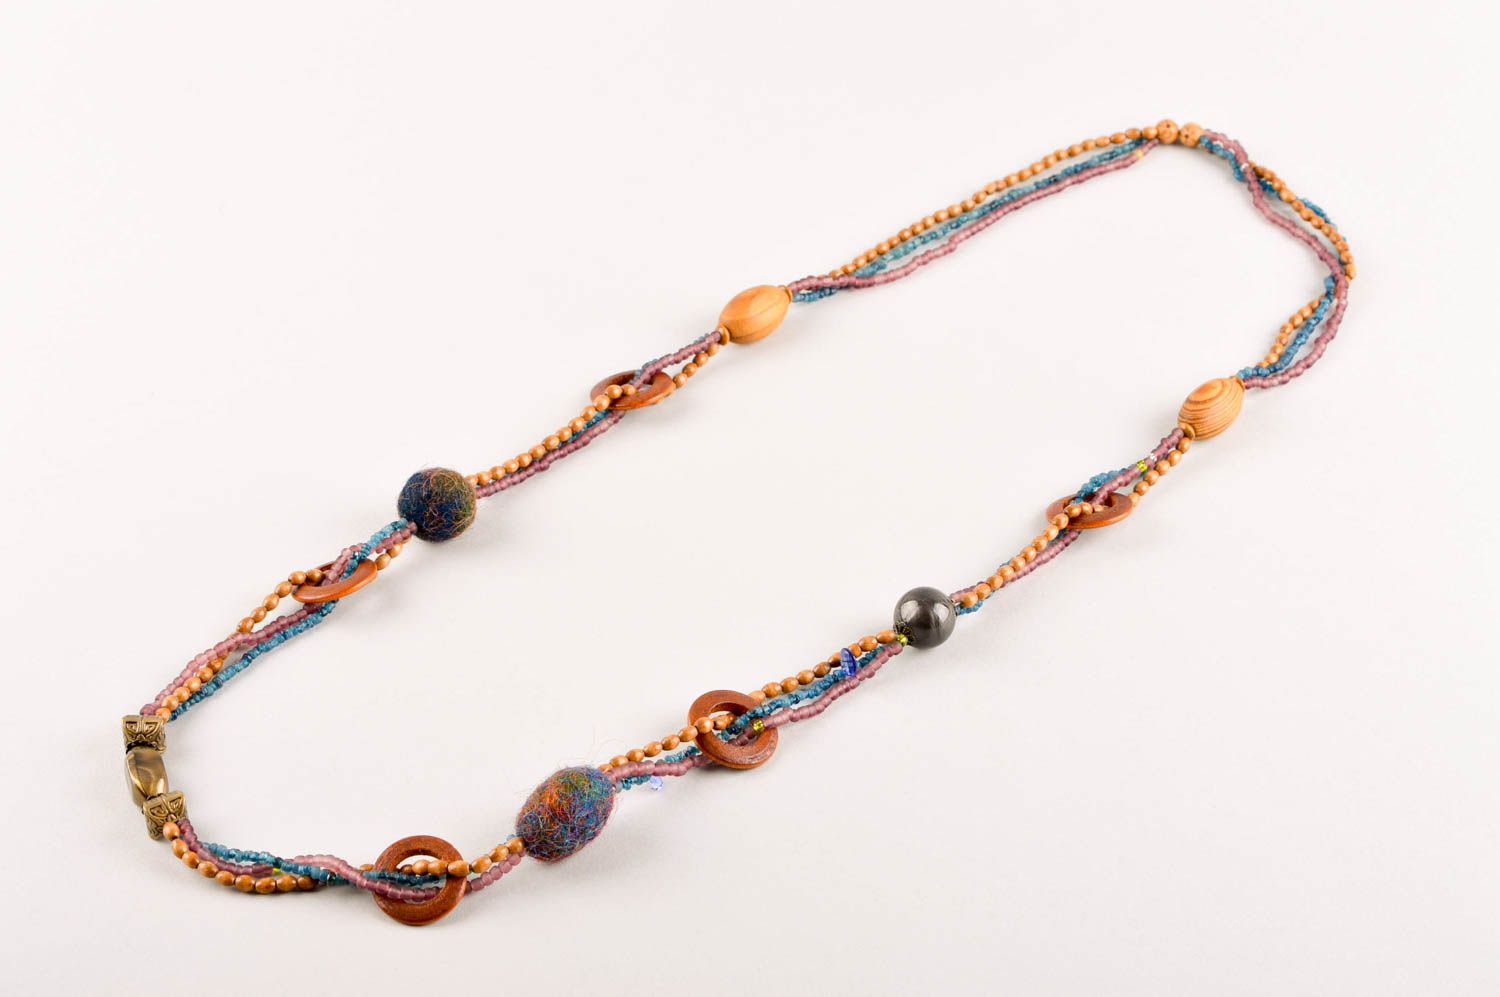 Unusual handmade beaded necklace bead necklace design wooden jewelry gift ideas photo 3